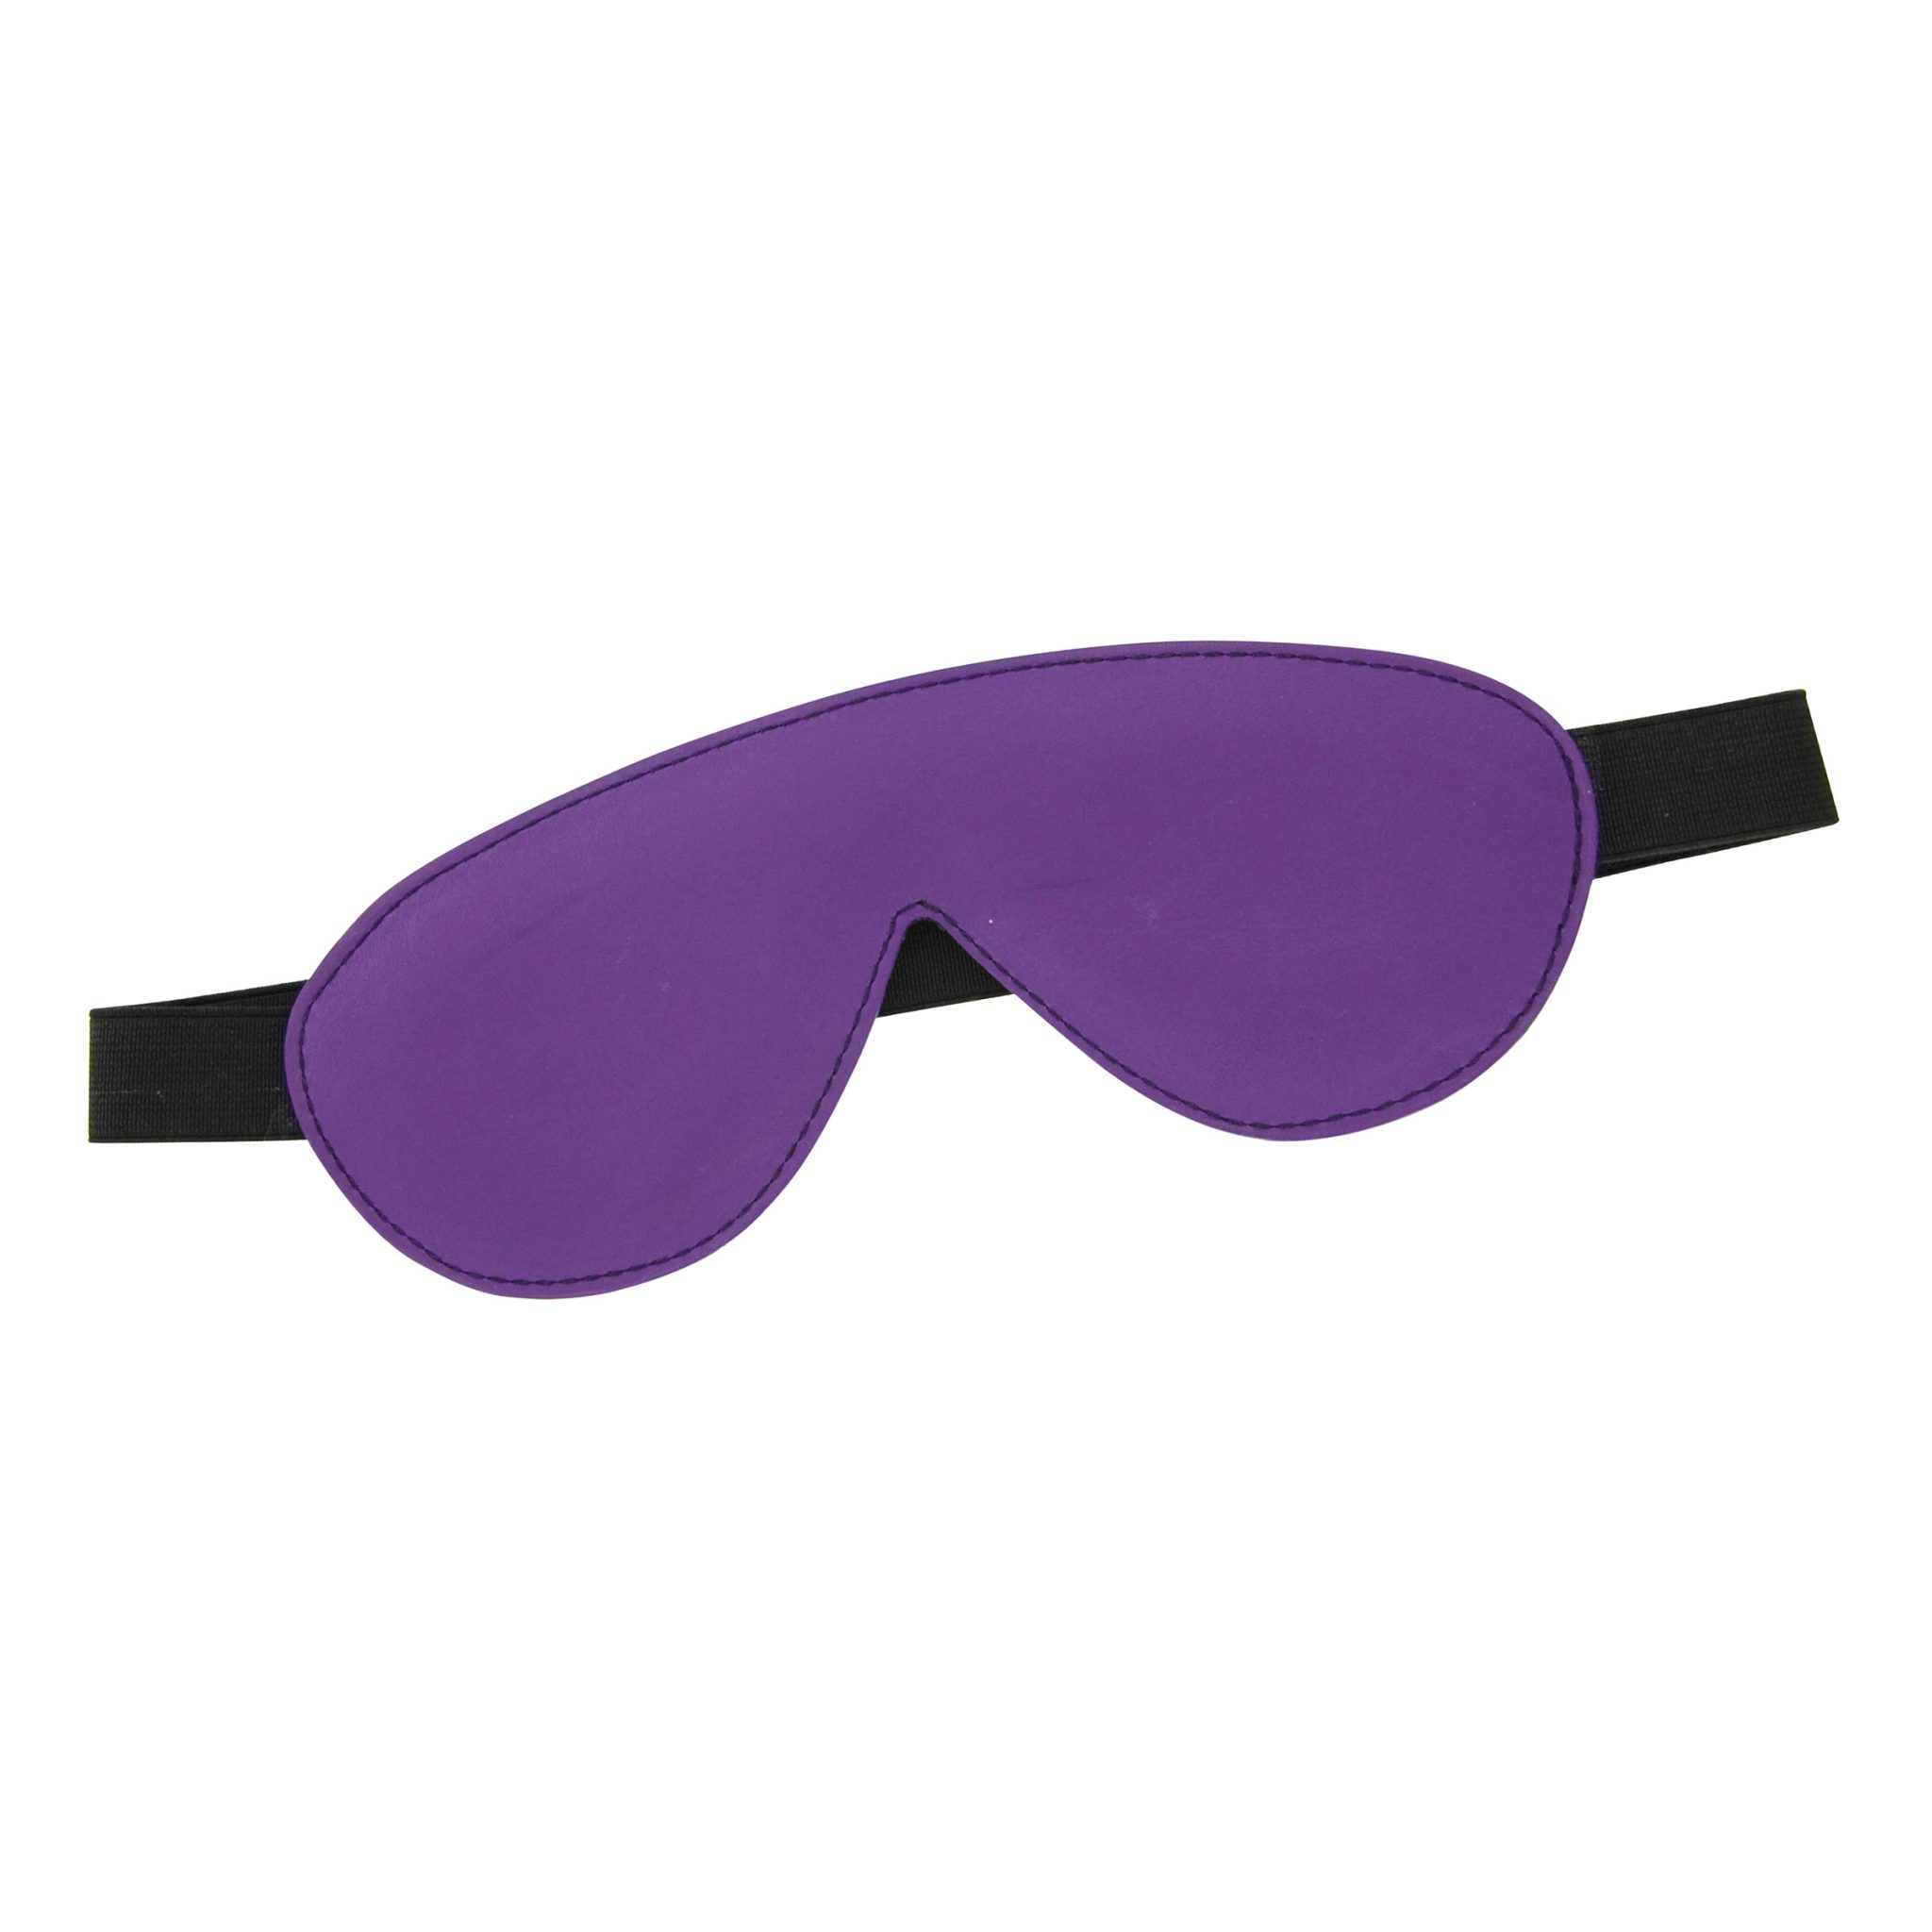 Blindfold Padded Leather – Purple and Black